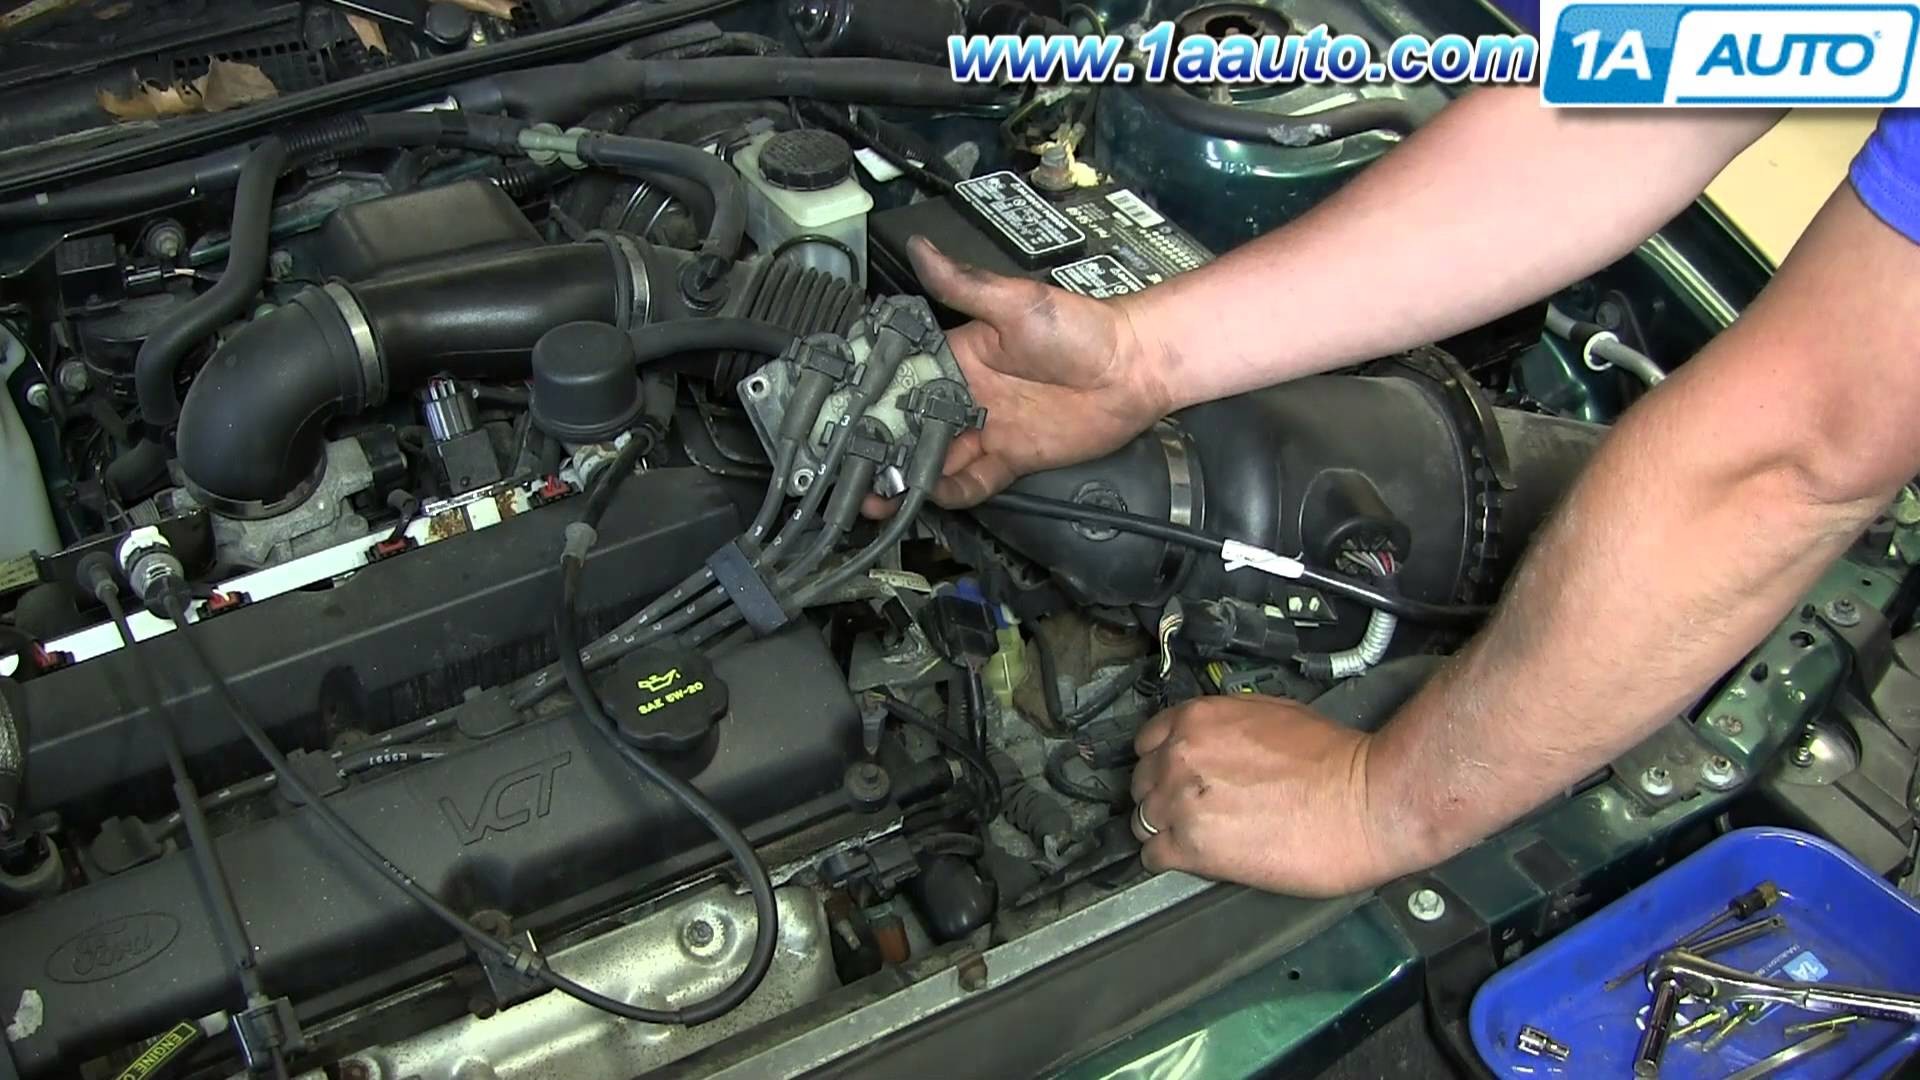 1997 ford Escort Engine Diagram How to Replace Fix Engine Ignition Coil 1998 03 ford Escort Zx2 2 0l